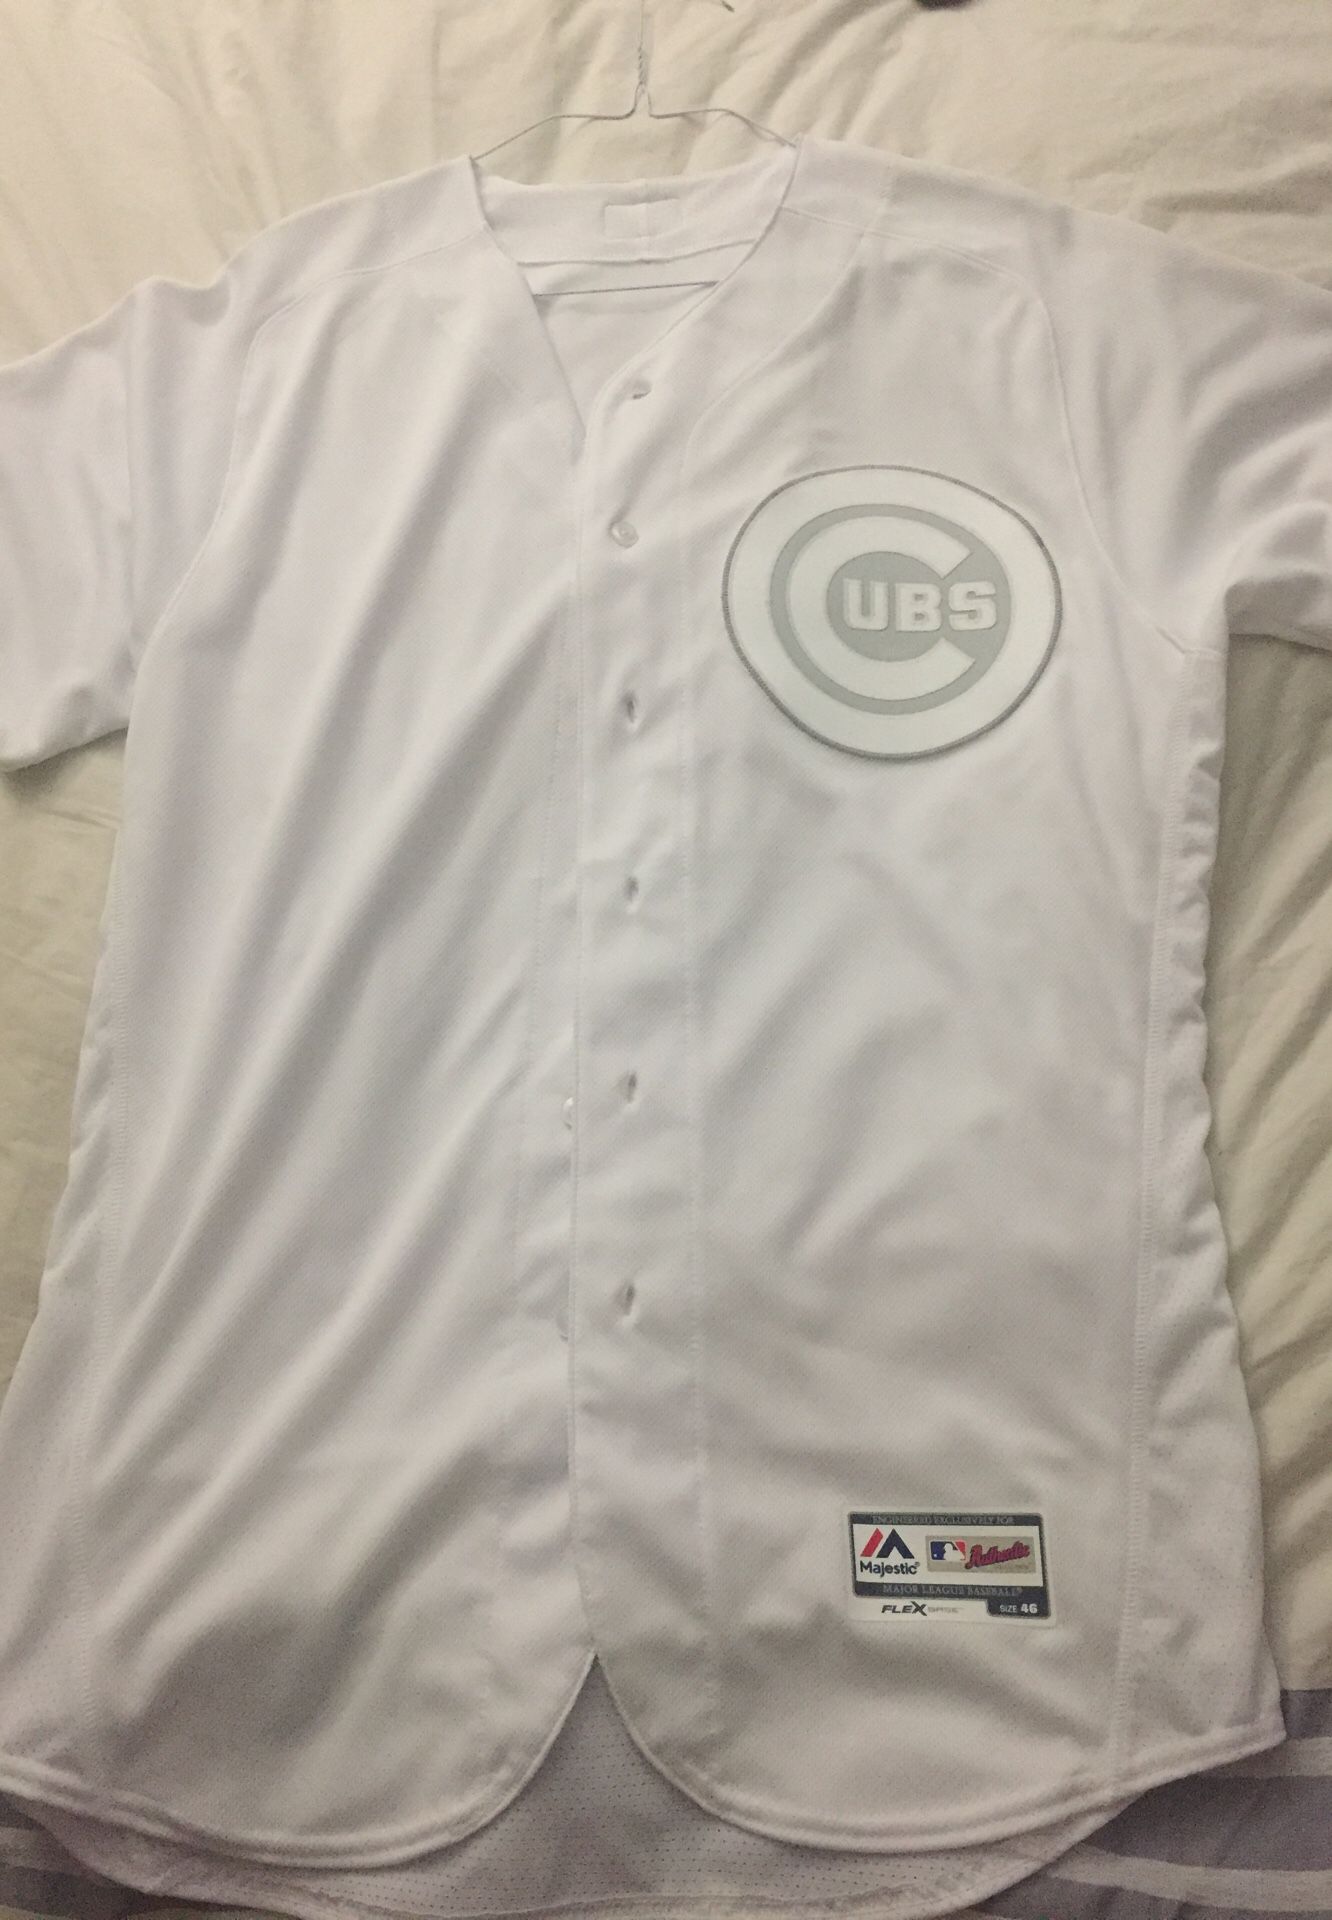 Authentic Chicago Cubs players weekend Jersey